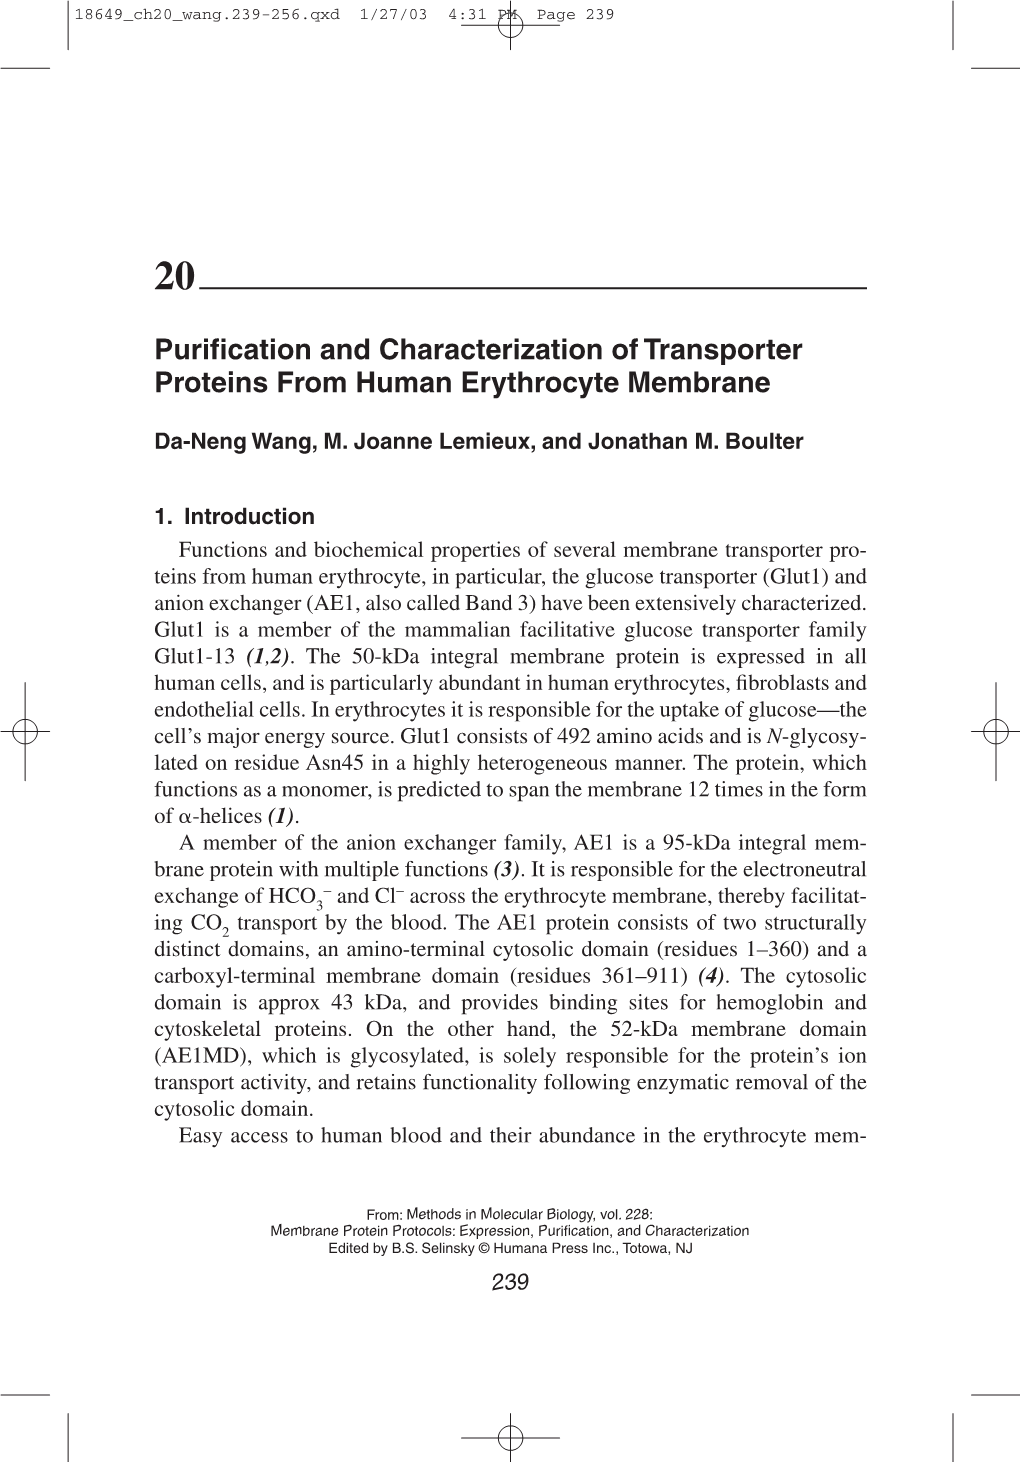 Purification and Characterization of Transporter Proteins from Human